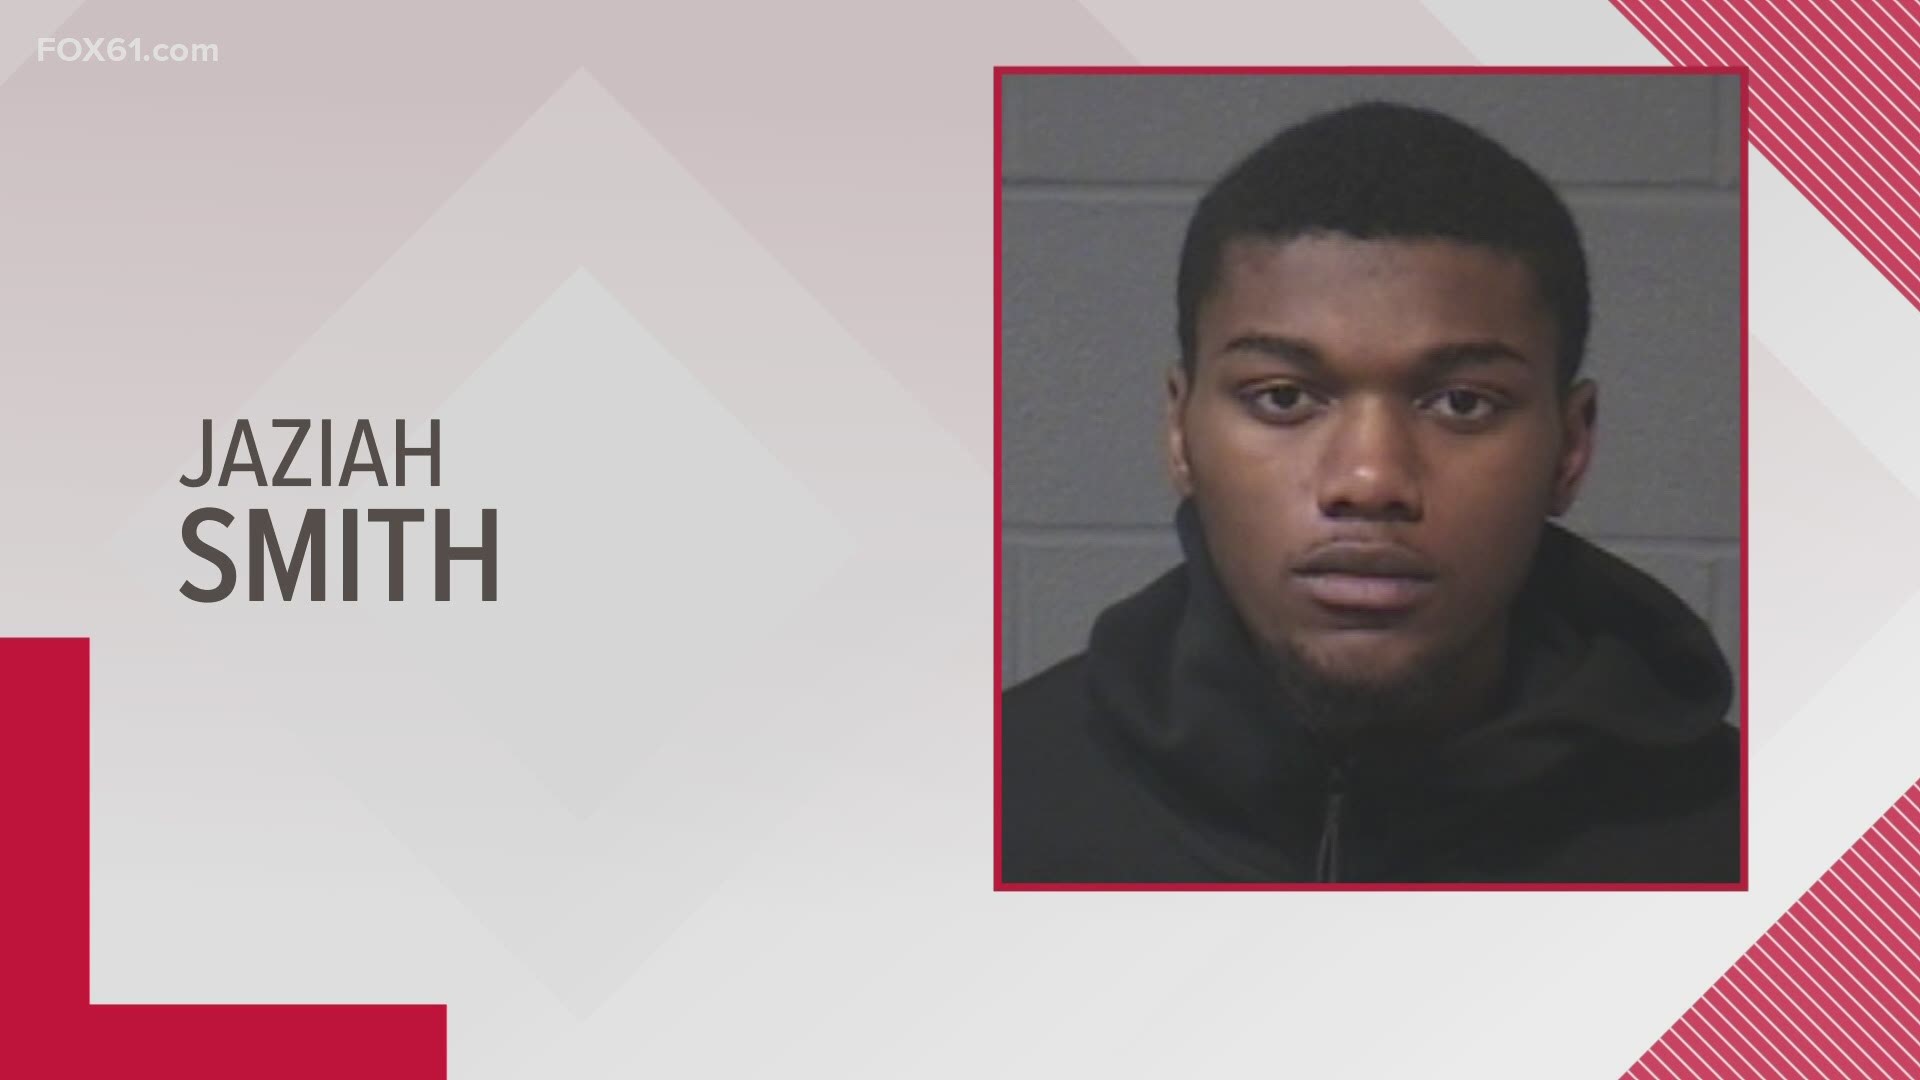 Police said 19-year-old Jaziah Smith has been charged with murder.